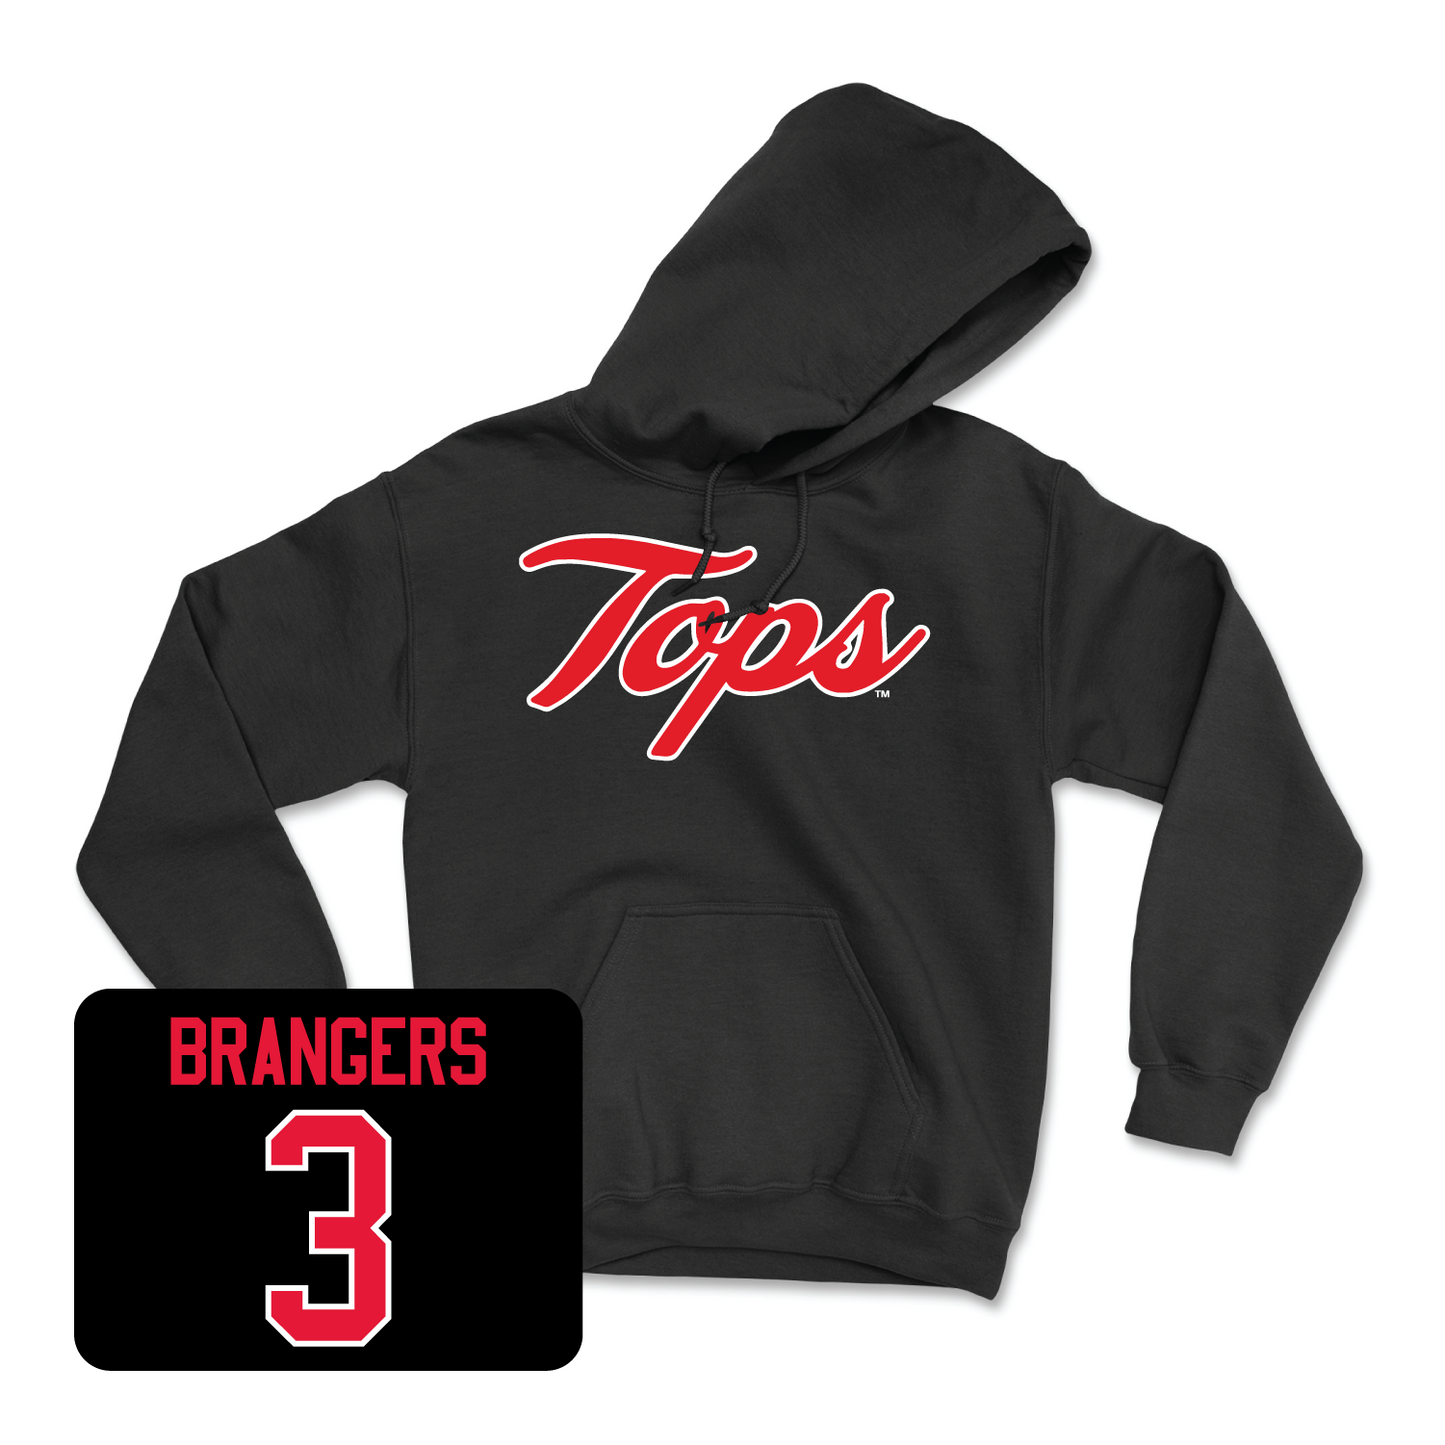 Black Women's Volleyball Tops Hoodie Youth Large / Kelsey Brangers | #3